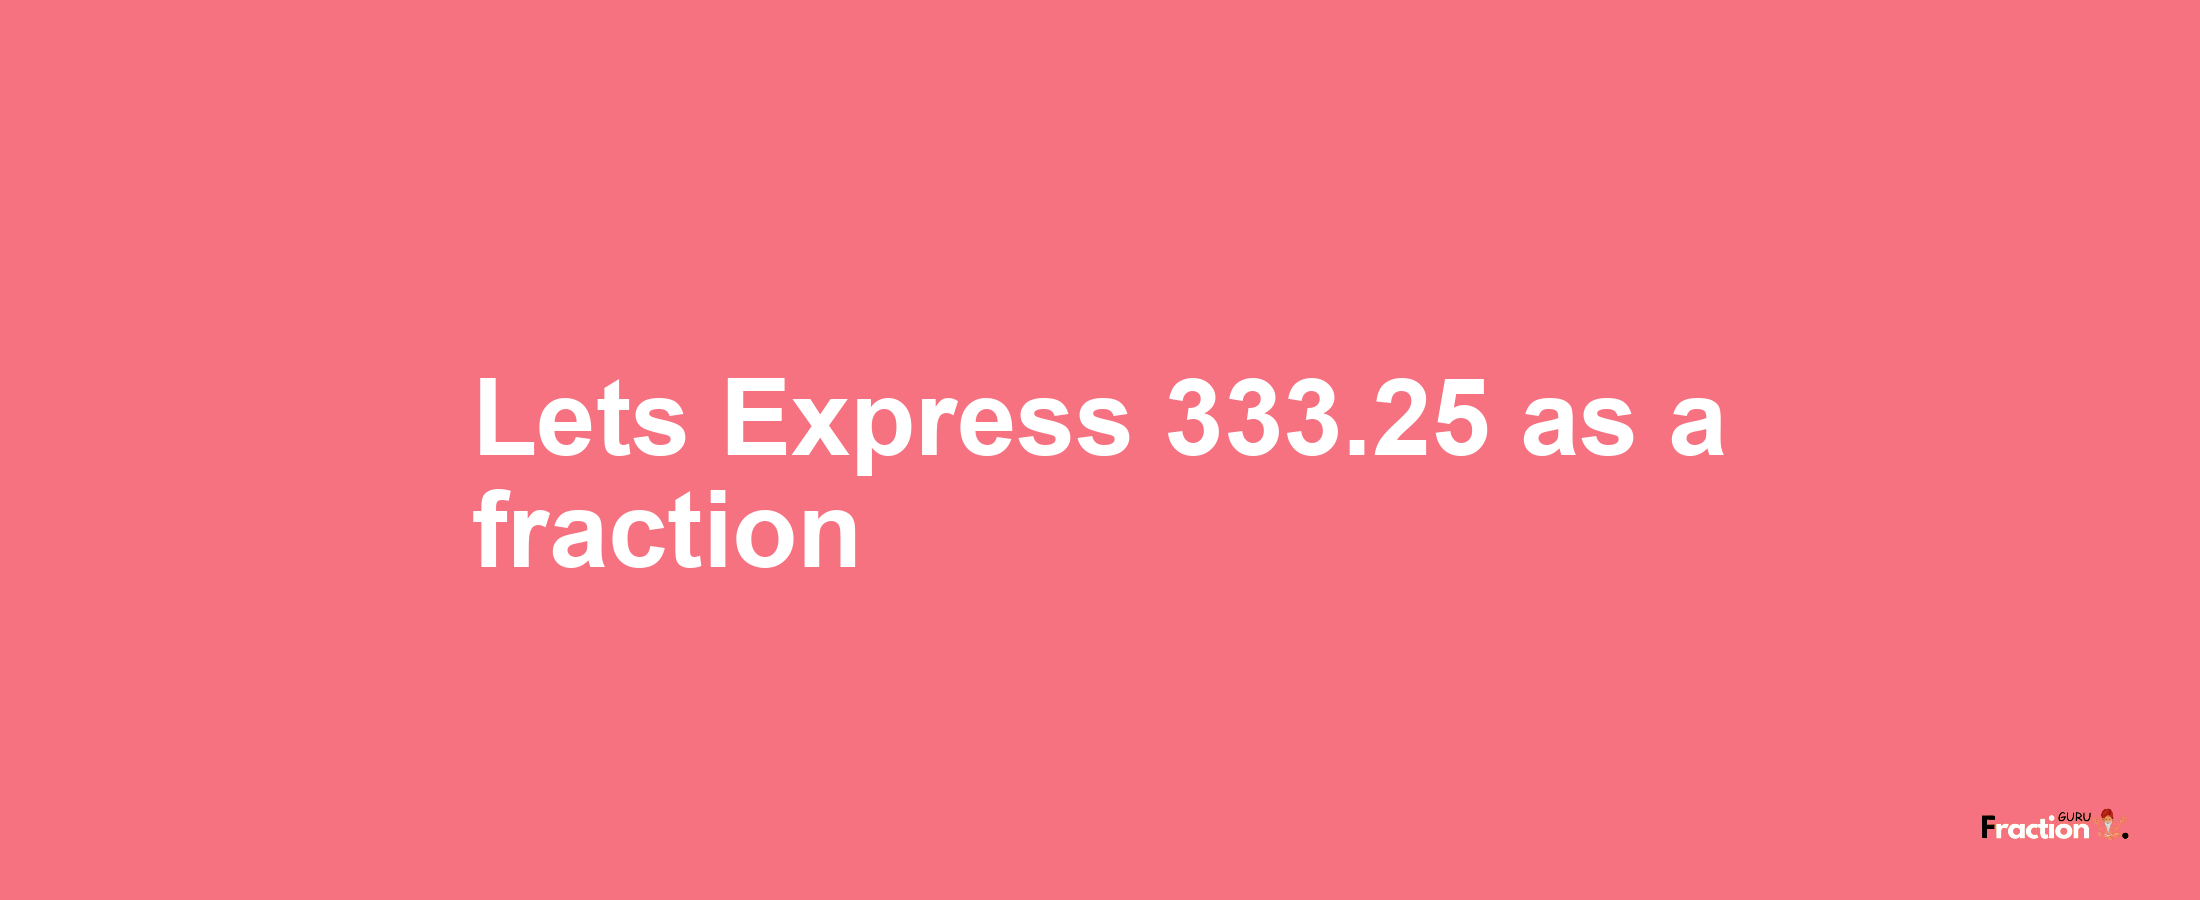 Lets Express 333.25 as afraction